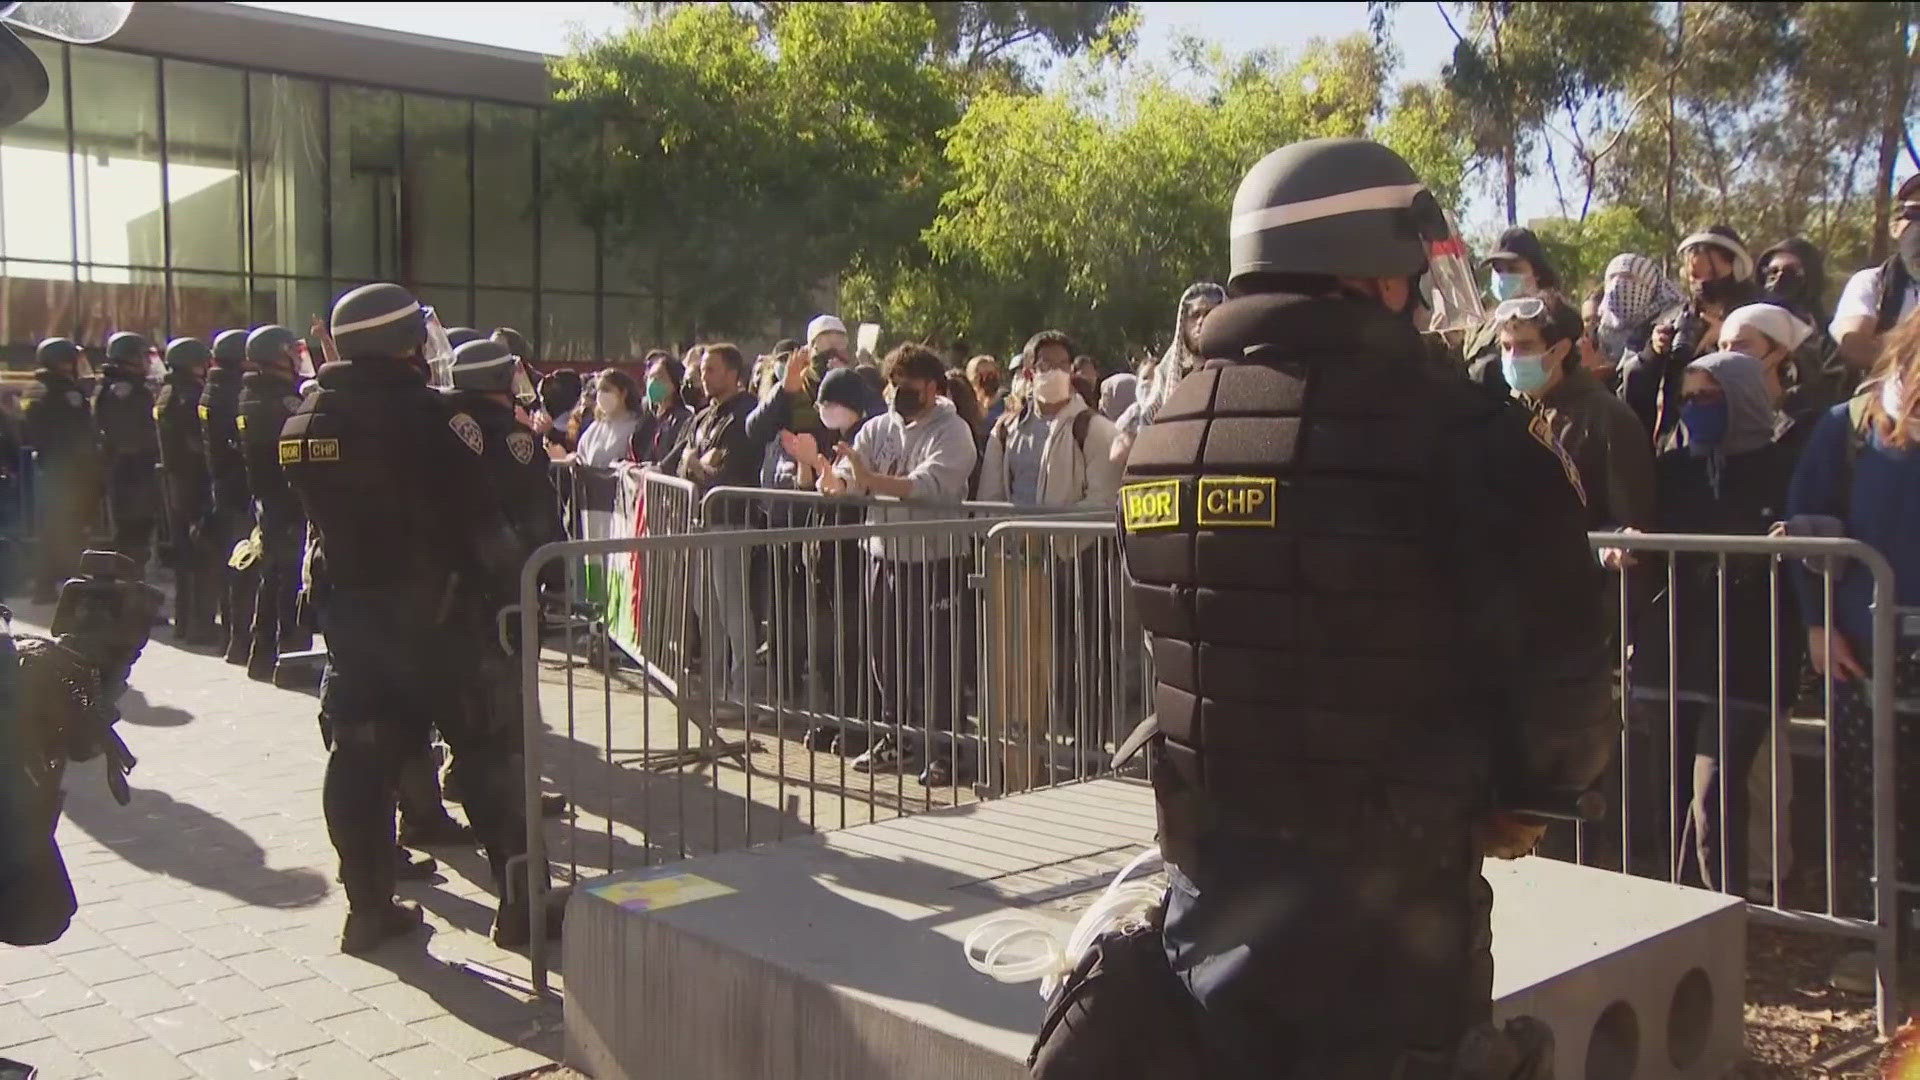 Following more than 60 arrests at UC San Diego Monday morning, those taken into custody have been released after many of them were booked at the Central Jail